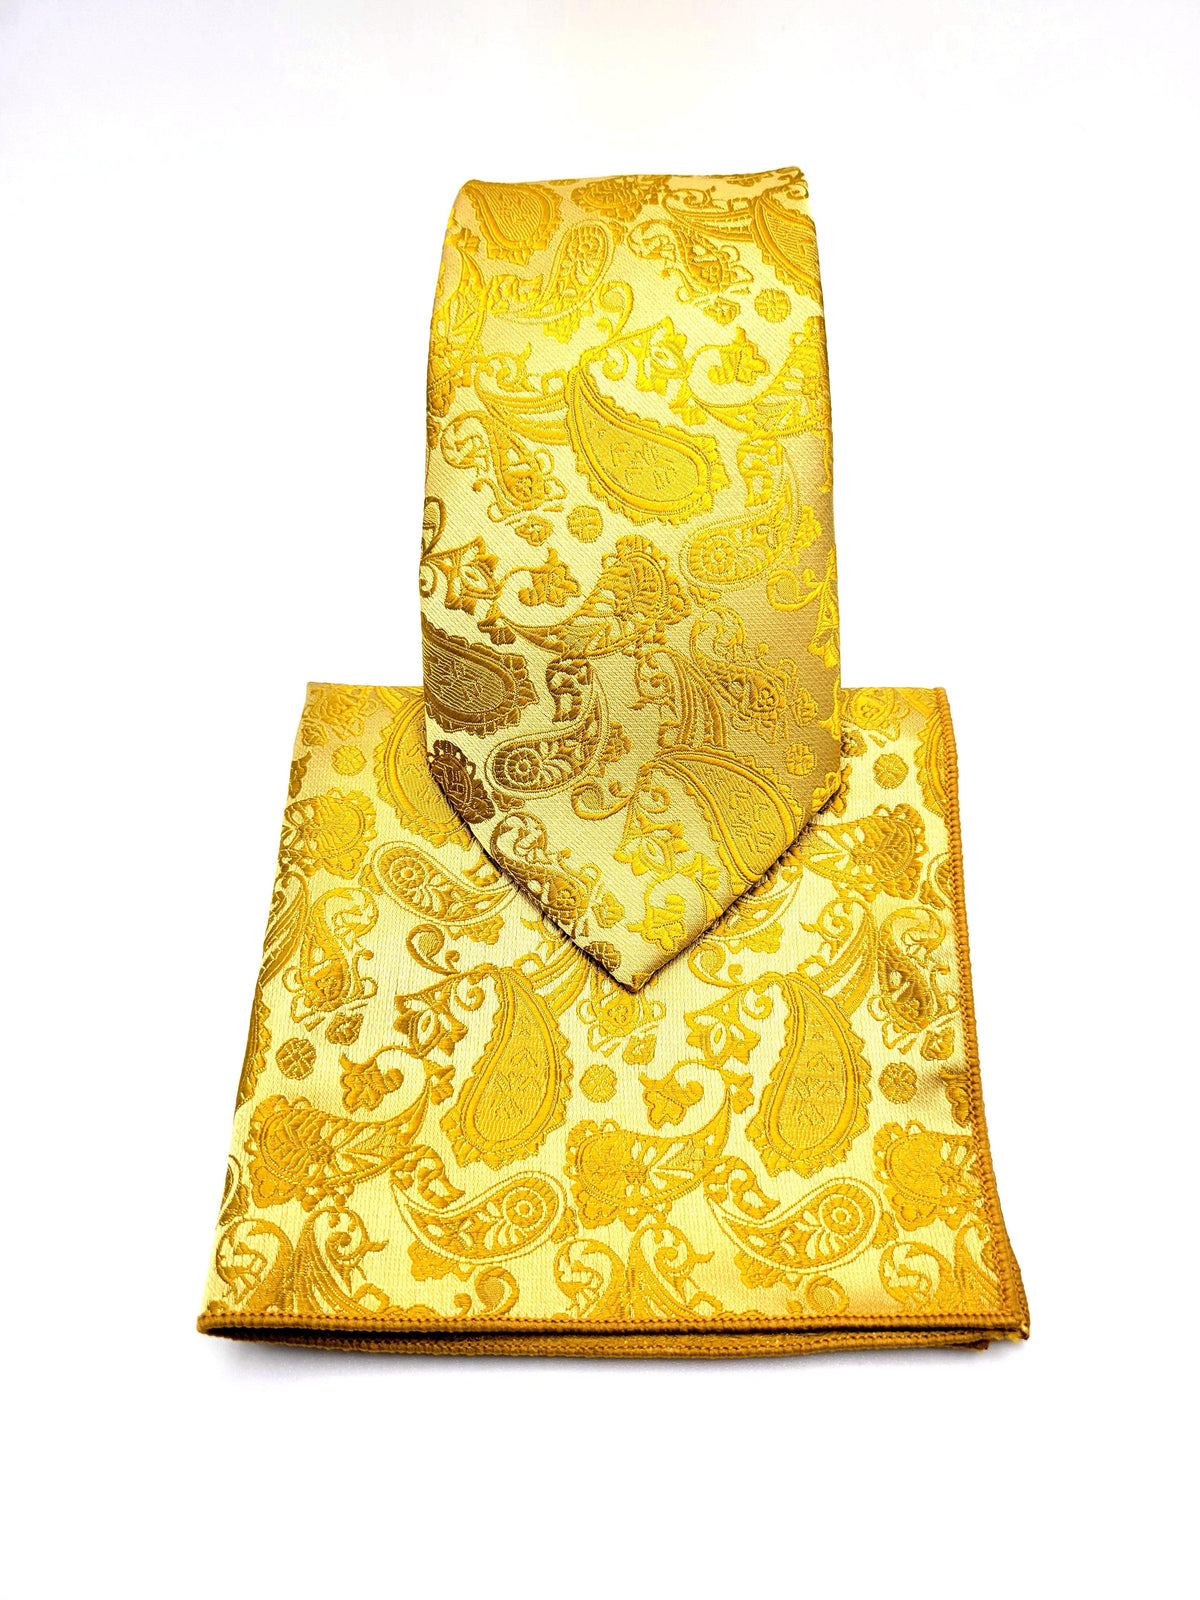 Gold Paisley Necktie and Pocket Square - The Upscale Banker